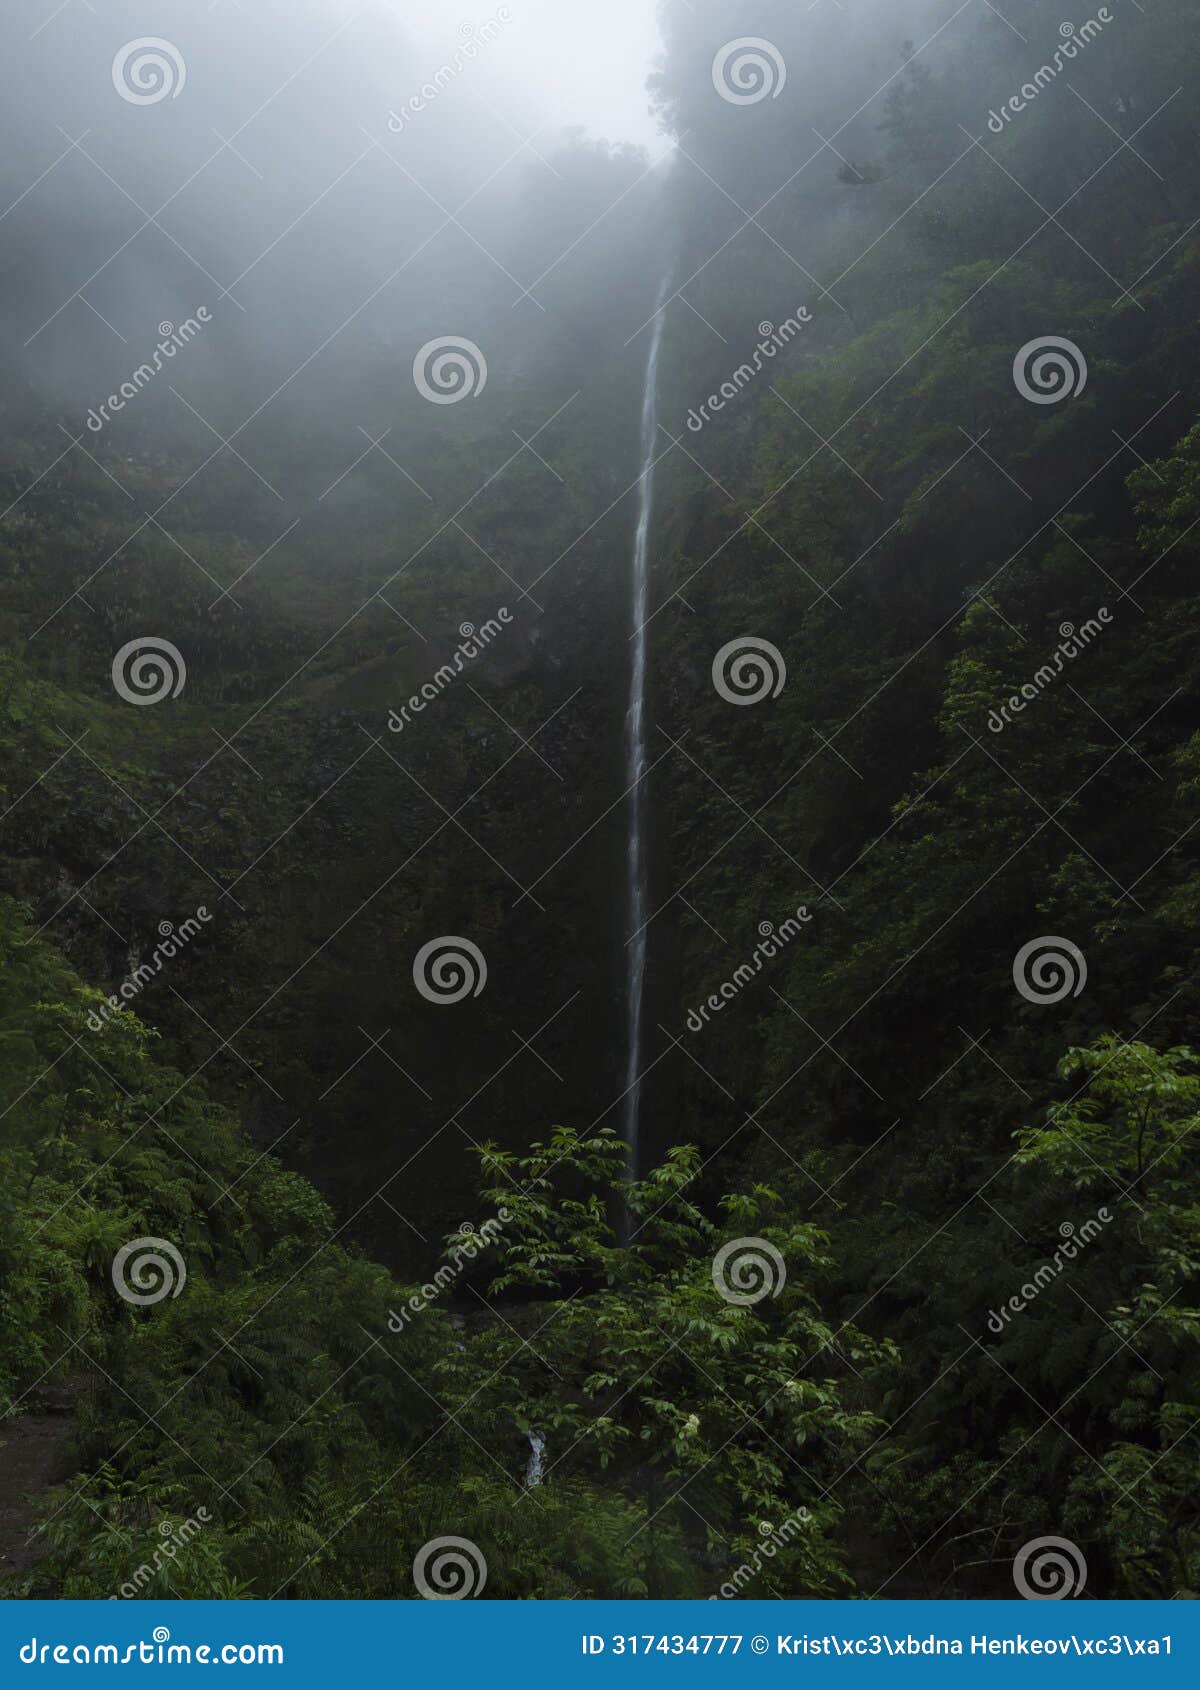 100 m high waterfall in thick fog at the end of levada caldeirao verde hiking trail, madeira island, portugal. dense